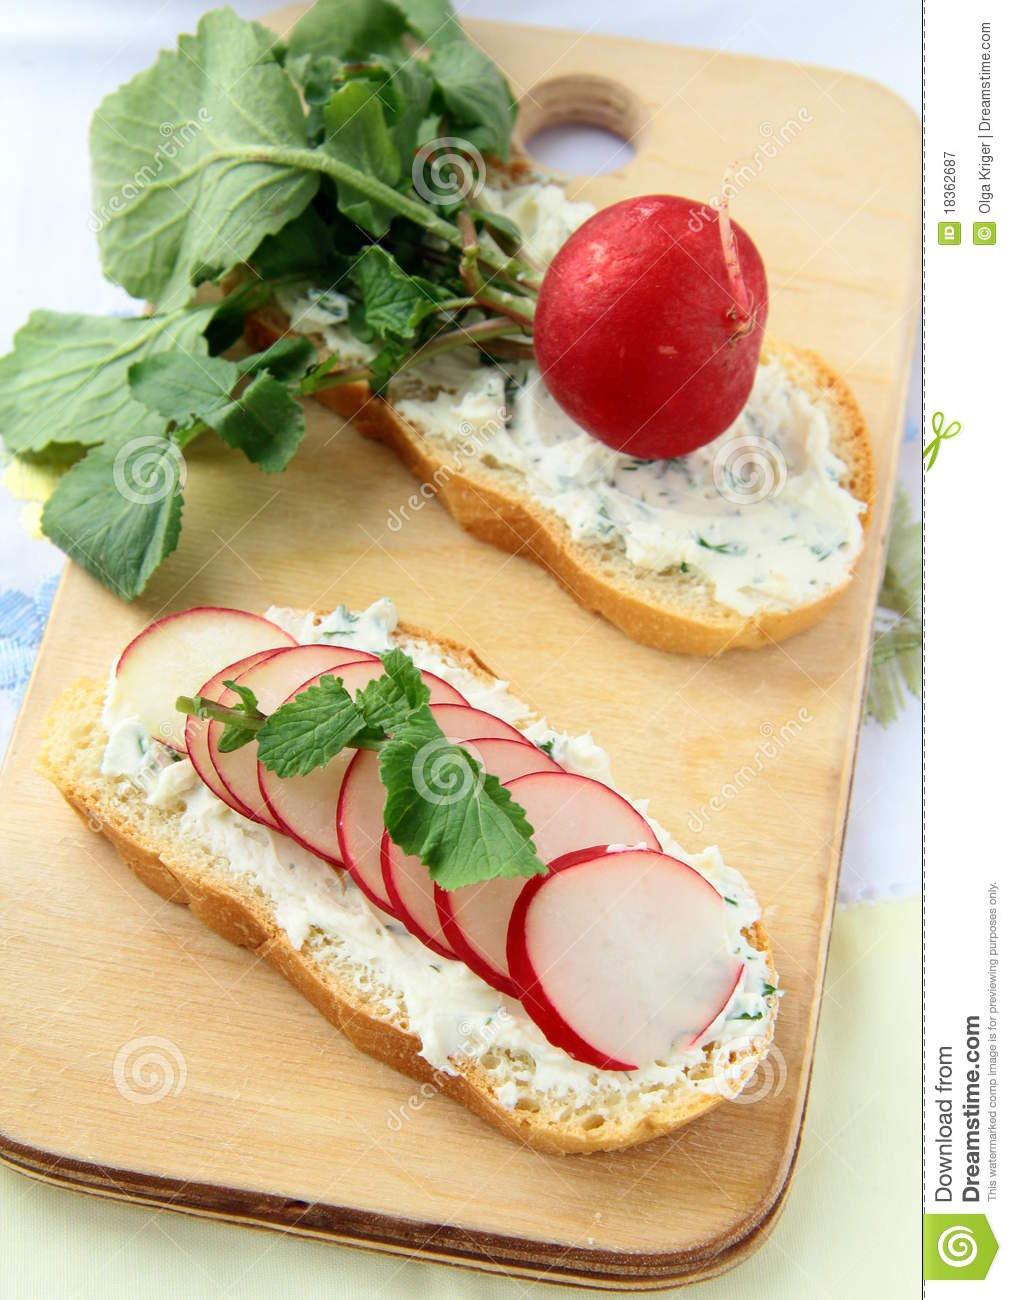 Cottage Cheese Sandwiches
 Sandwiches With Radishes And Cottage Cheese Stock Image